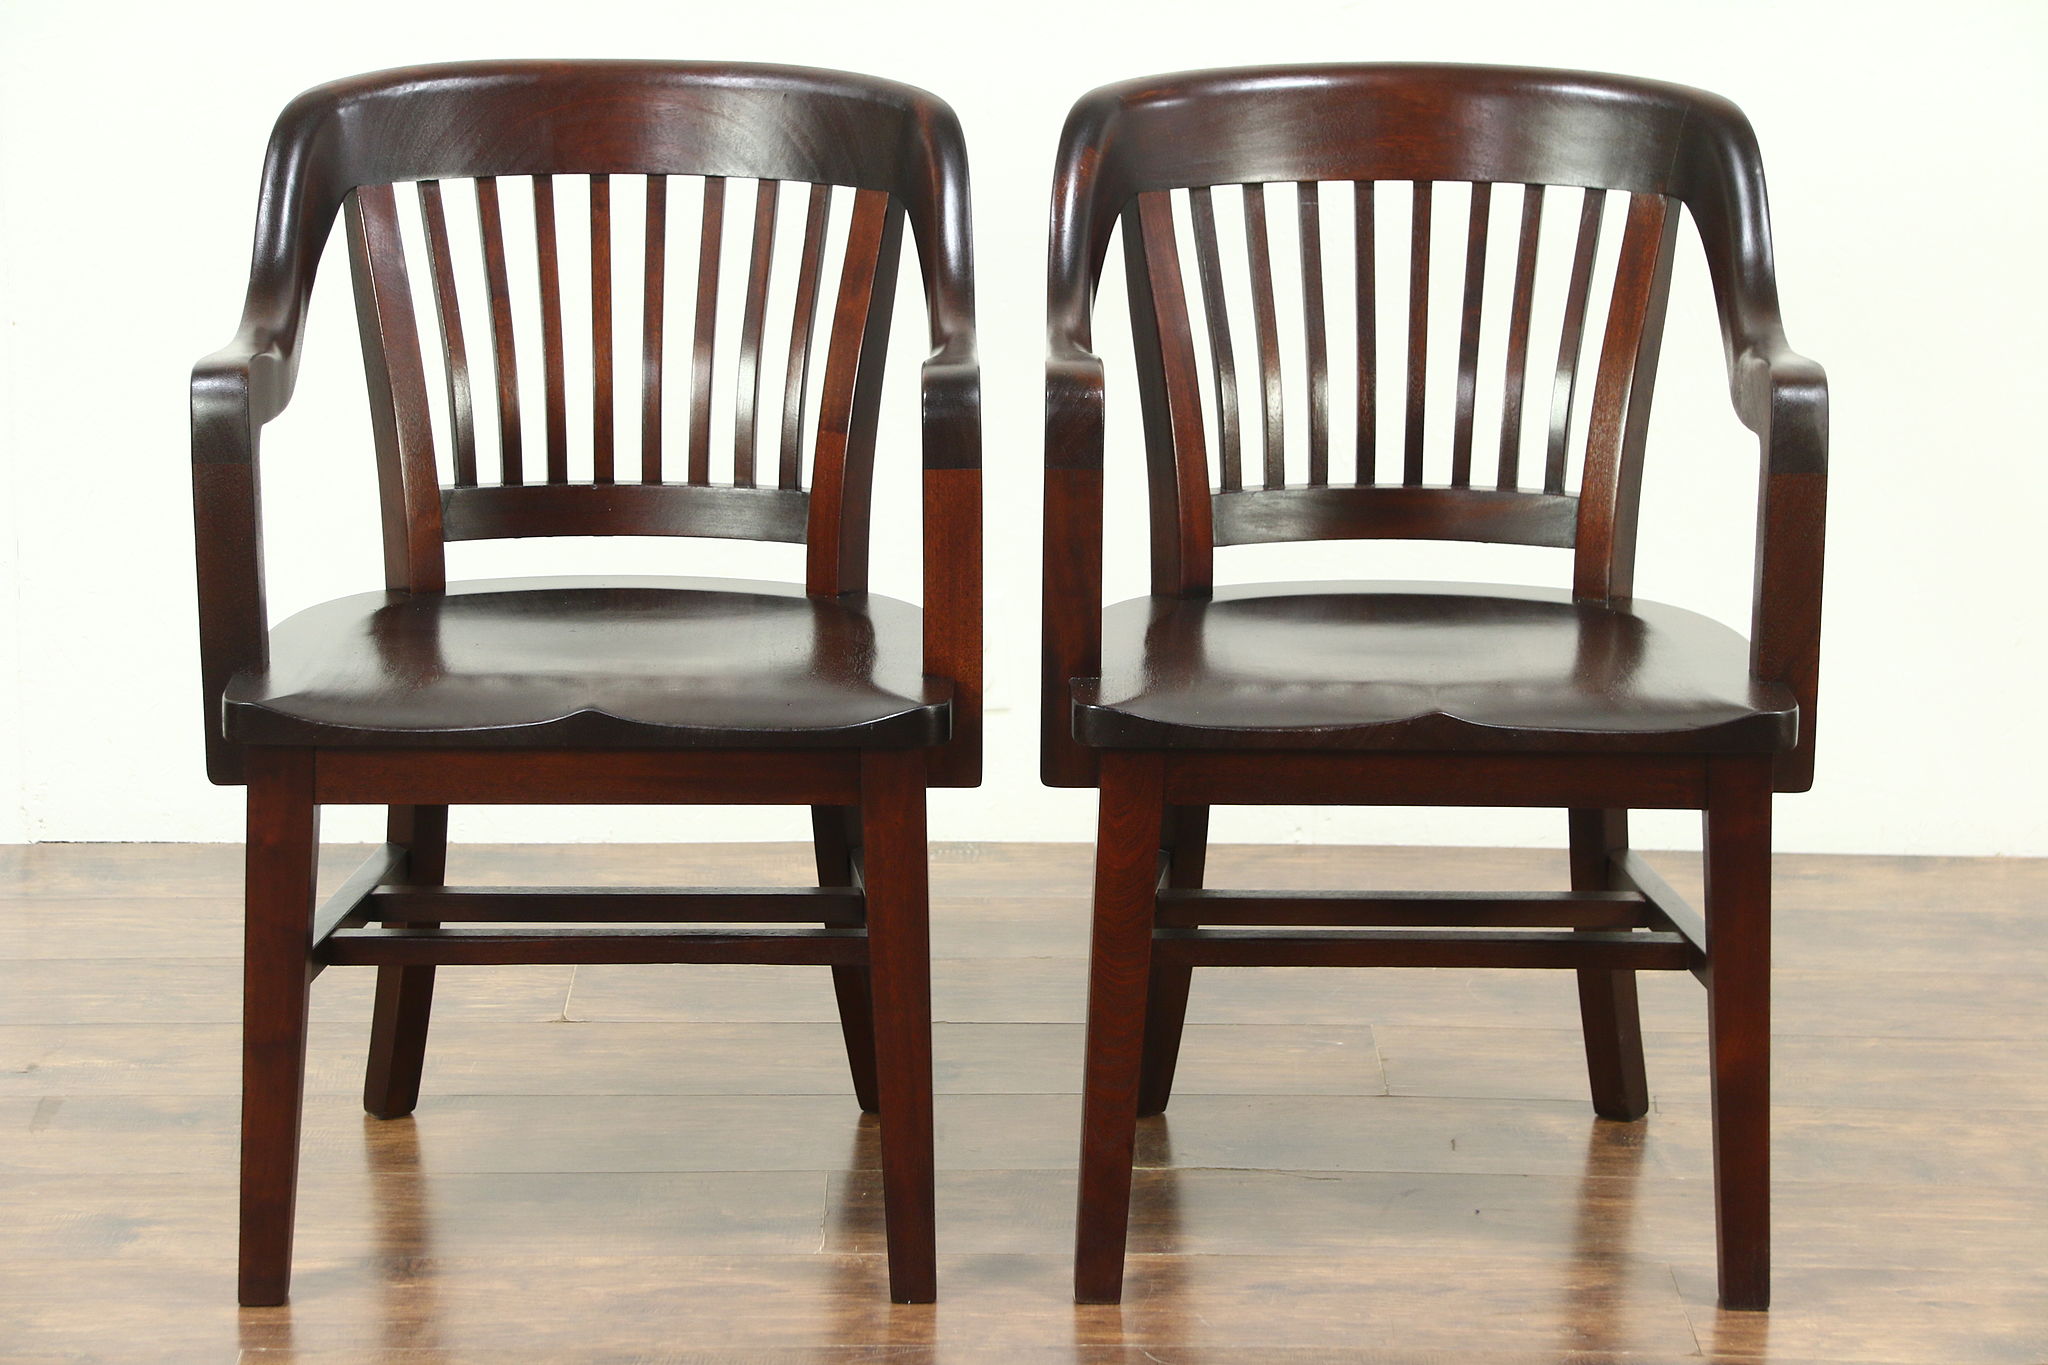 Sold Pair Antique Mahogany 1910 Library Or Office Chairs Signed